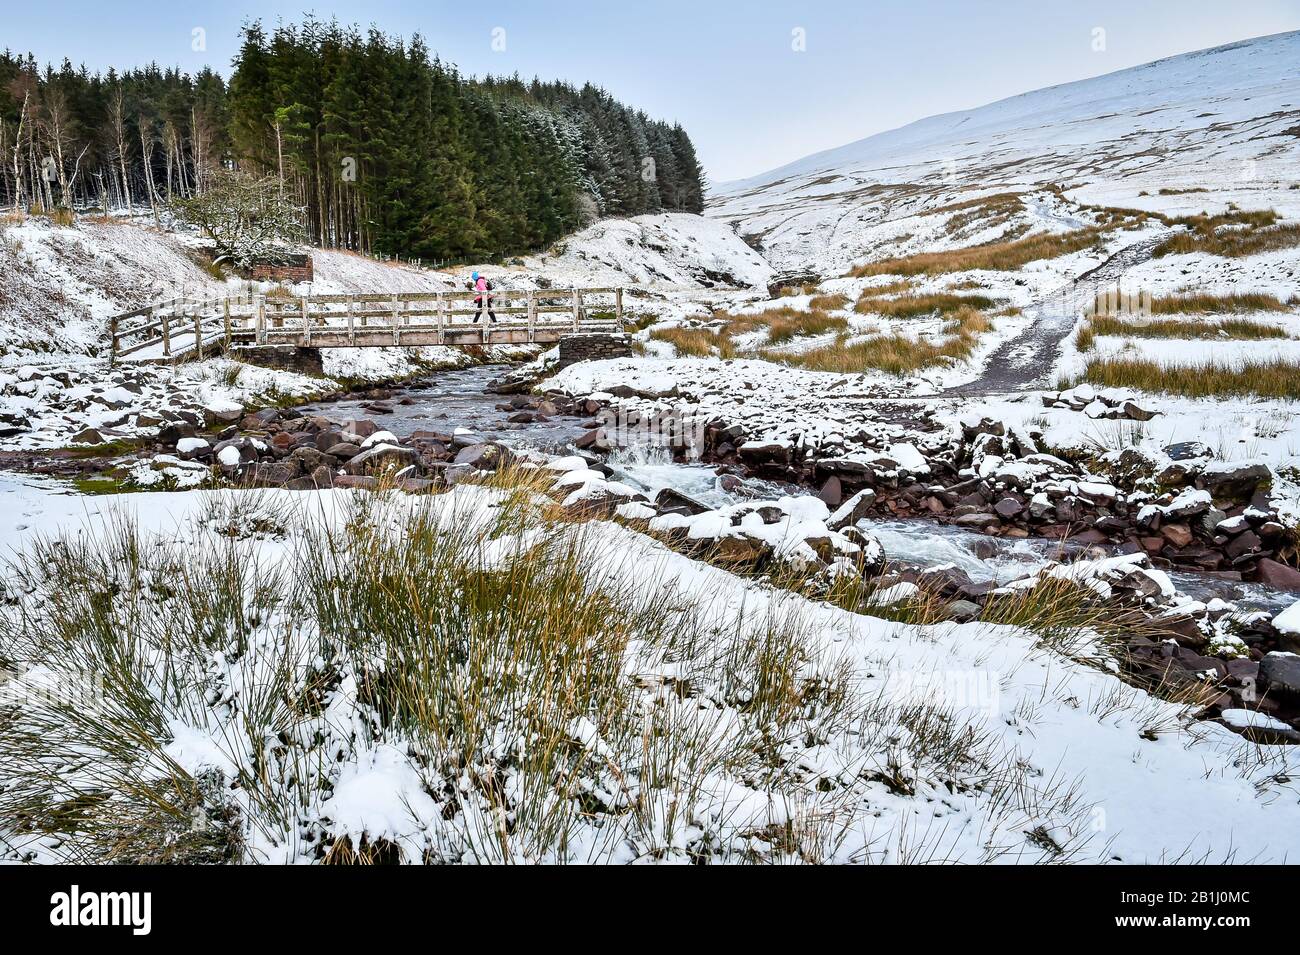 A walker crosses a bridge over a stream on the footpath near Pen y Fan mountain on Brecon Beacons National Park, Wales, after temperatures plummeted overnight across Britain, and forecasters warned of more ice and snow over the next 24 hours. Stock Photo